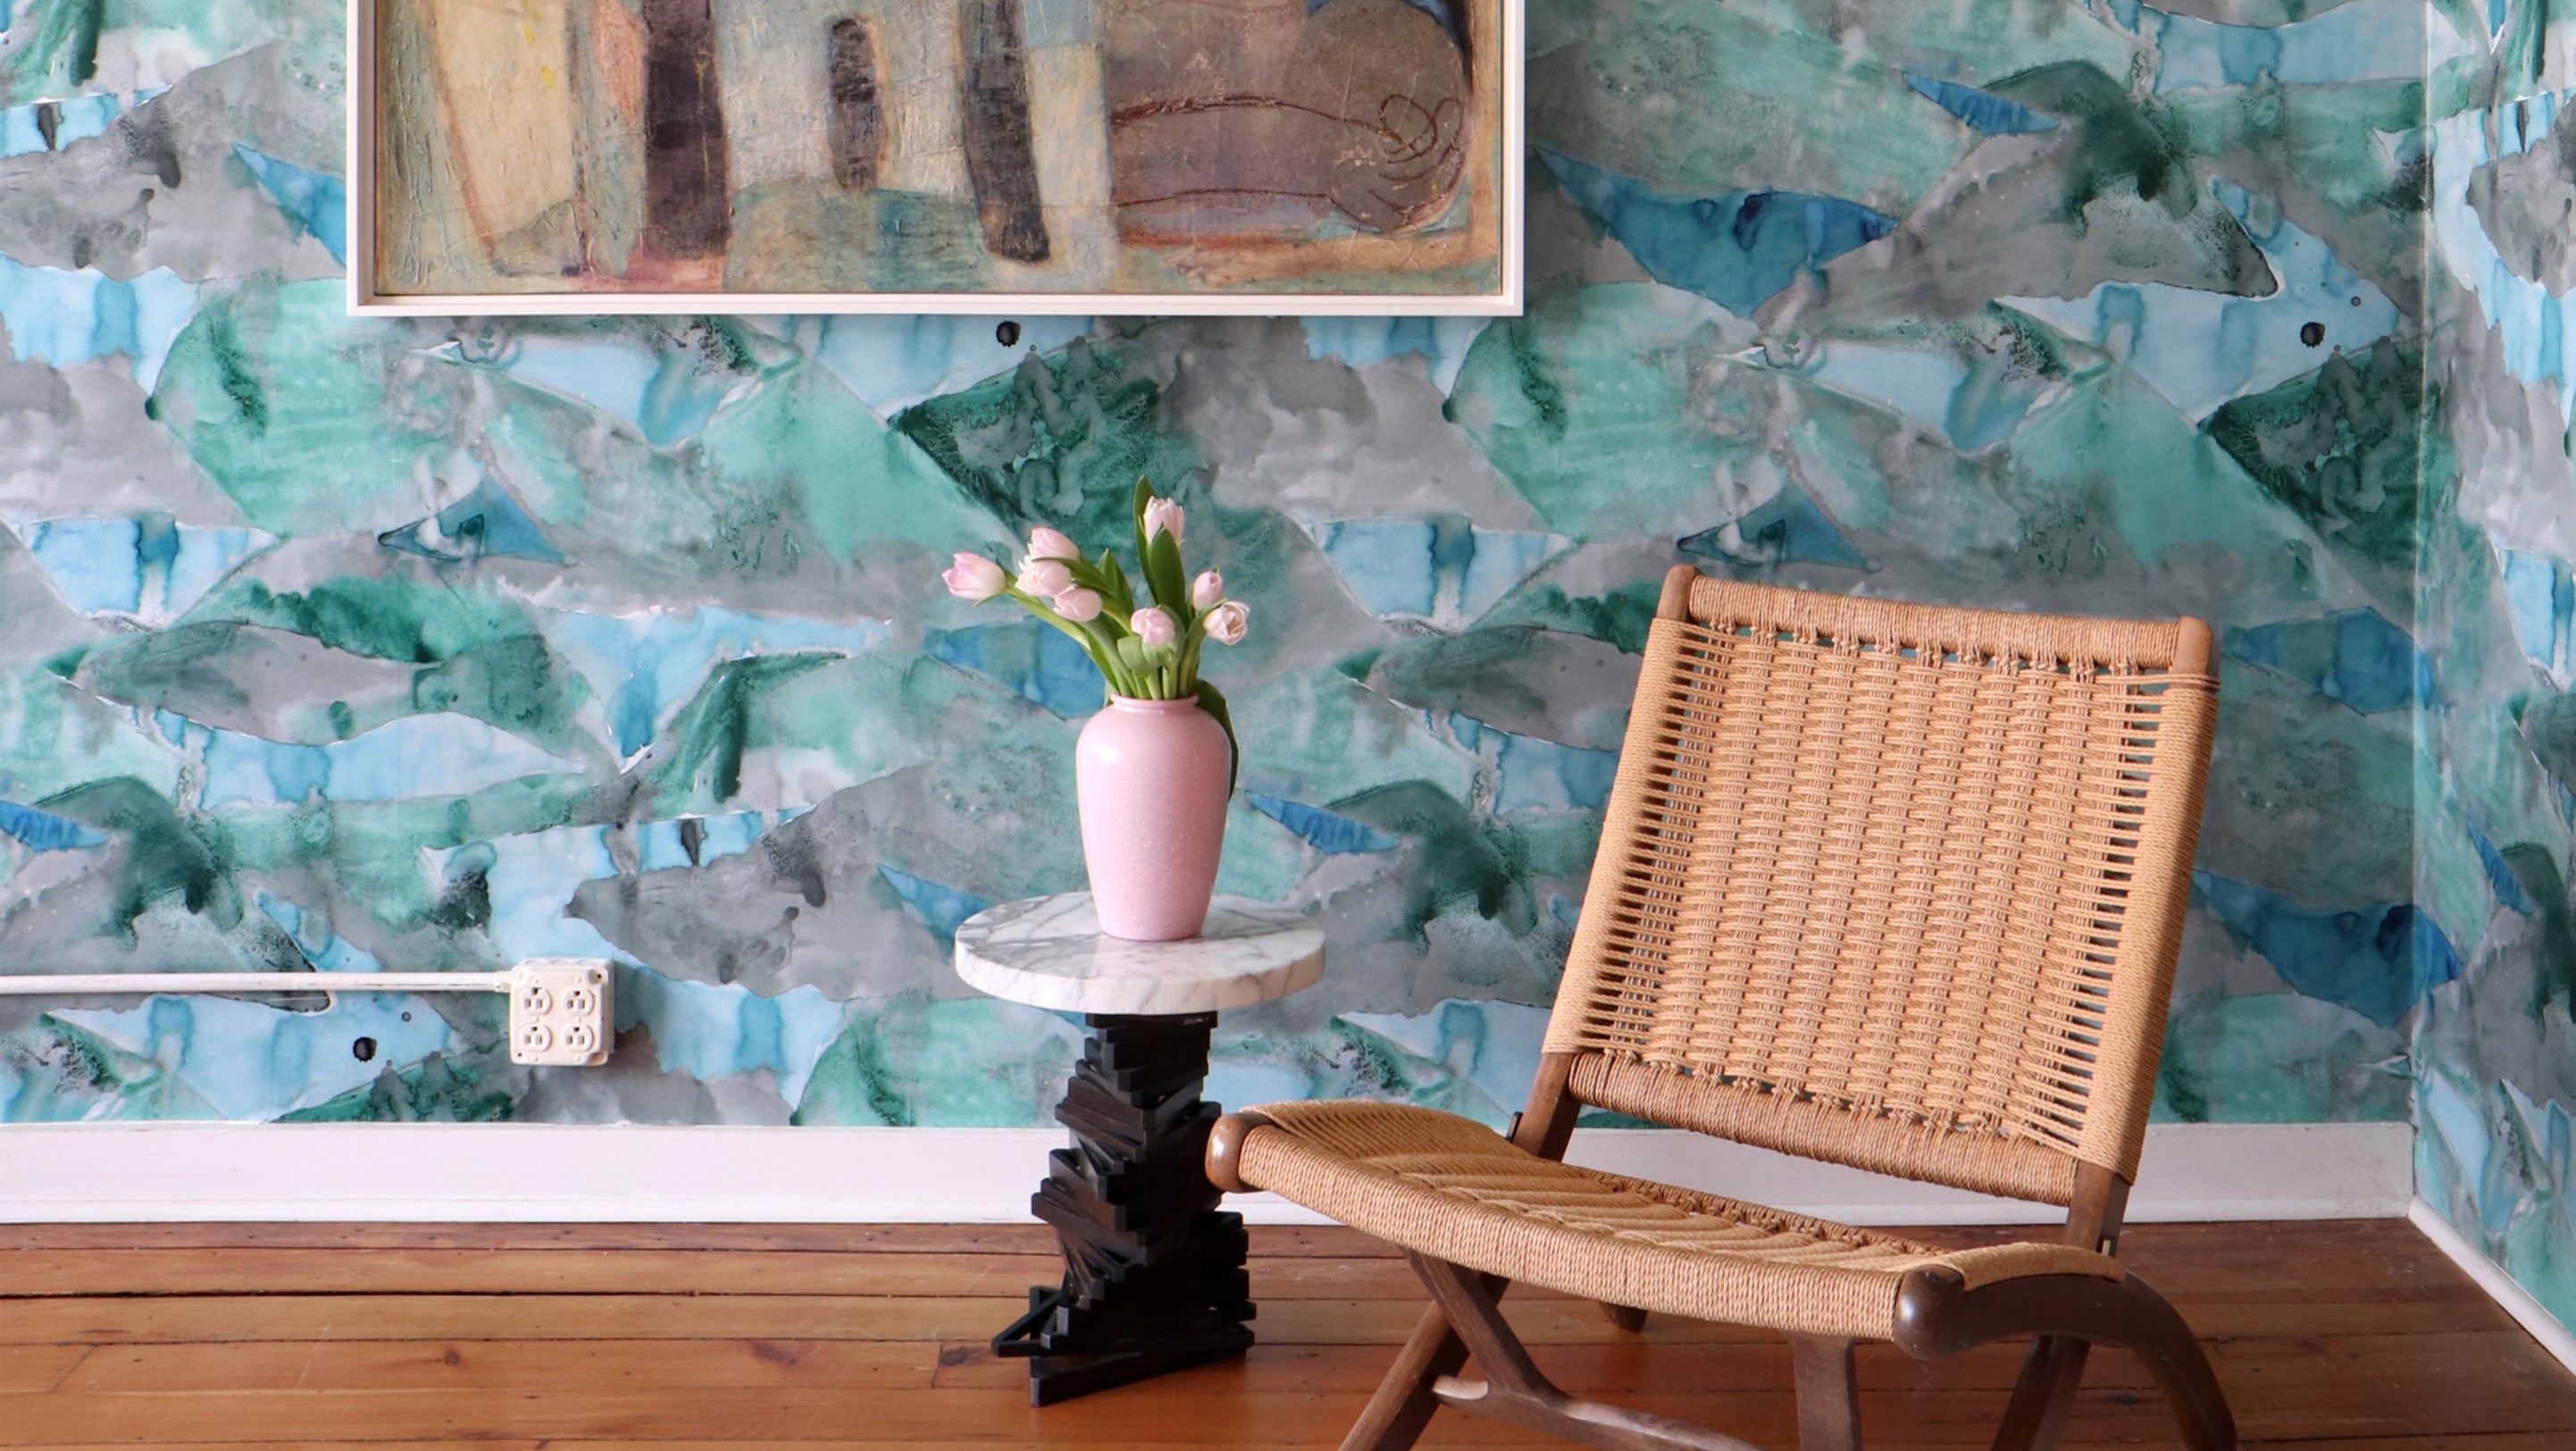 A wicker chair sits in front of a blue and green wallpaper